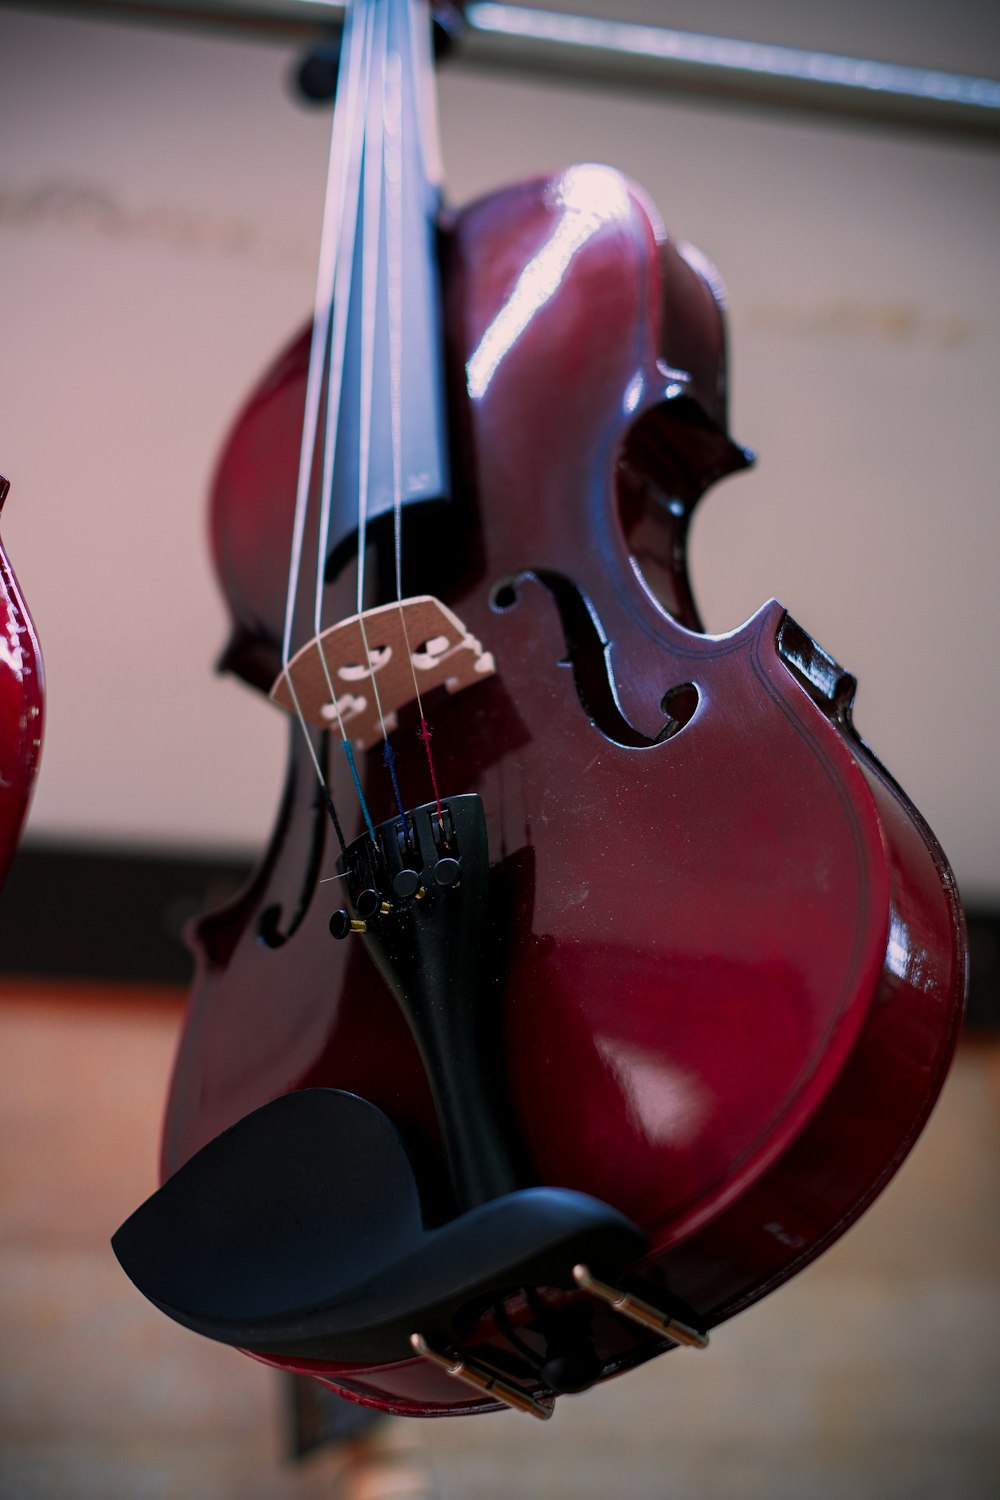 a close up of a violin hanging from a ceiling